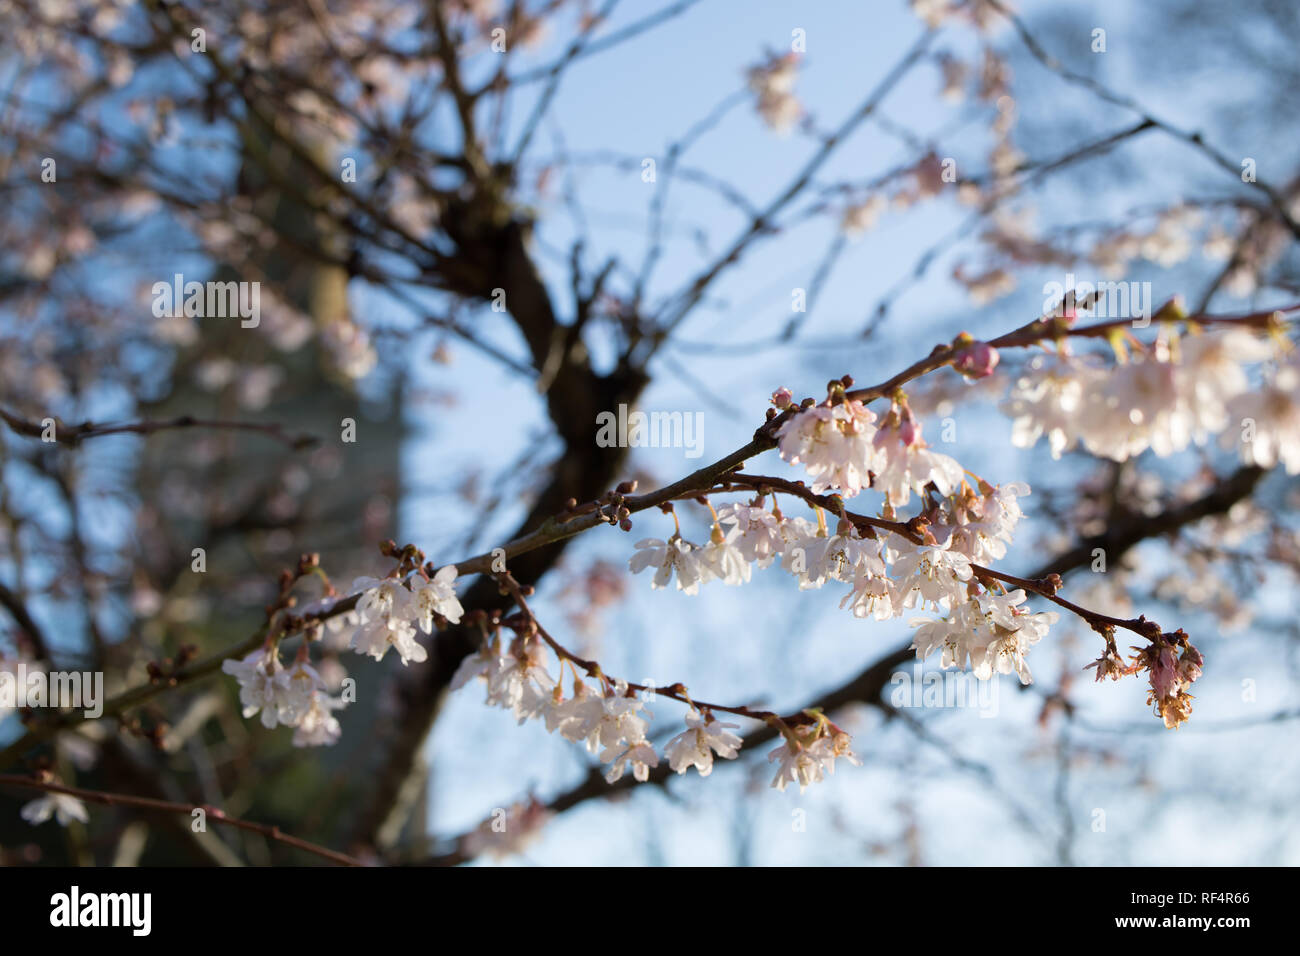 Blossom on a winter flowering cherry tree in the English village of Sharnbrook, Bedfordshire with St Peter's Church tower in the background. Stock Photo